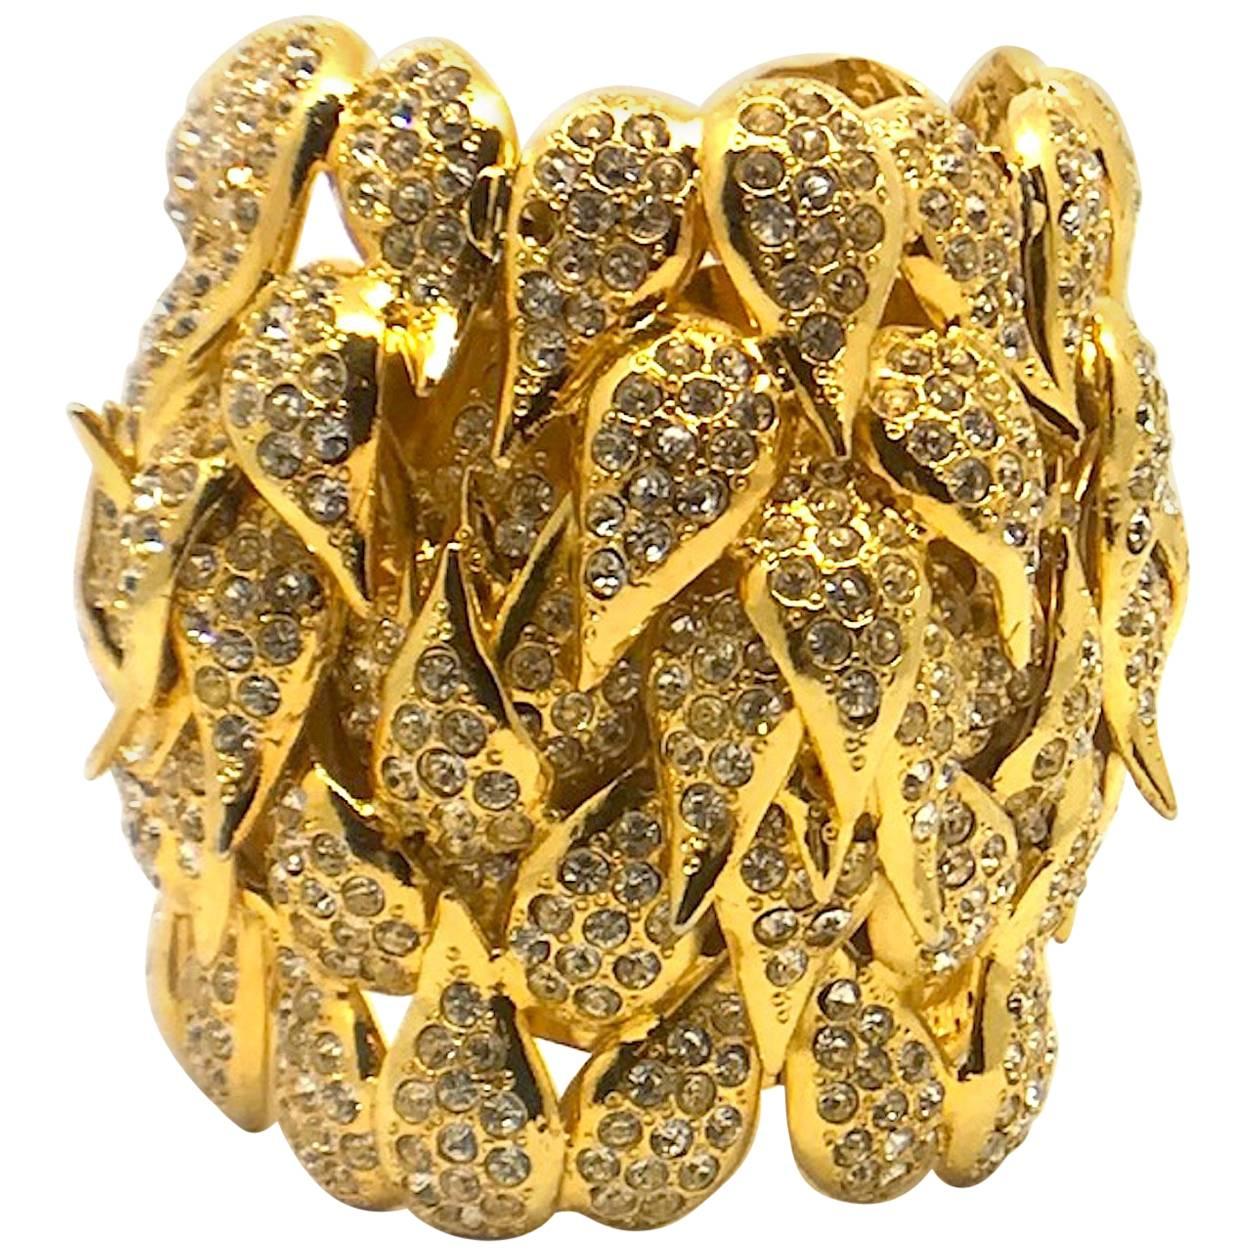 De Liguoro gold cuff bracelet from Actress Elsa Martinelli's personal collection